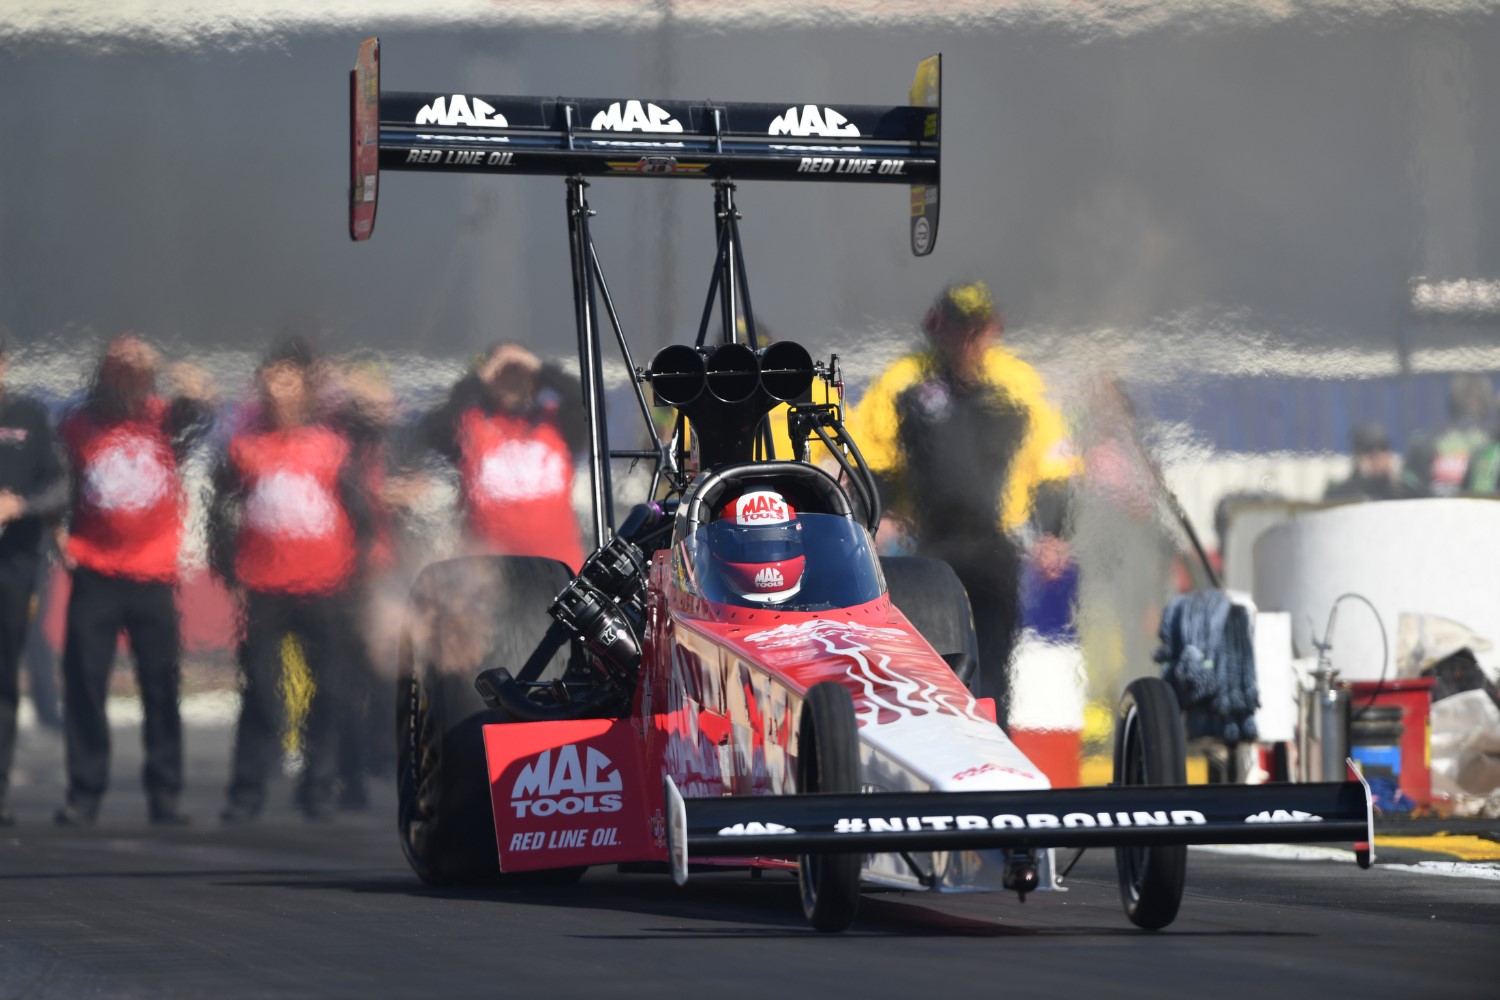 Kalitta Top Fuel dragster at Pomona this year